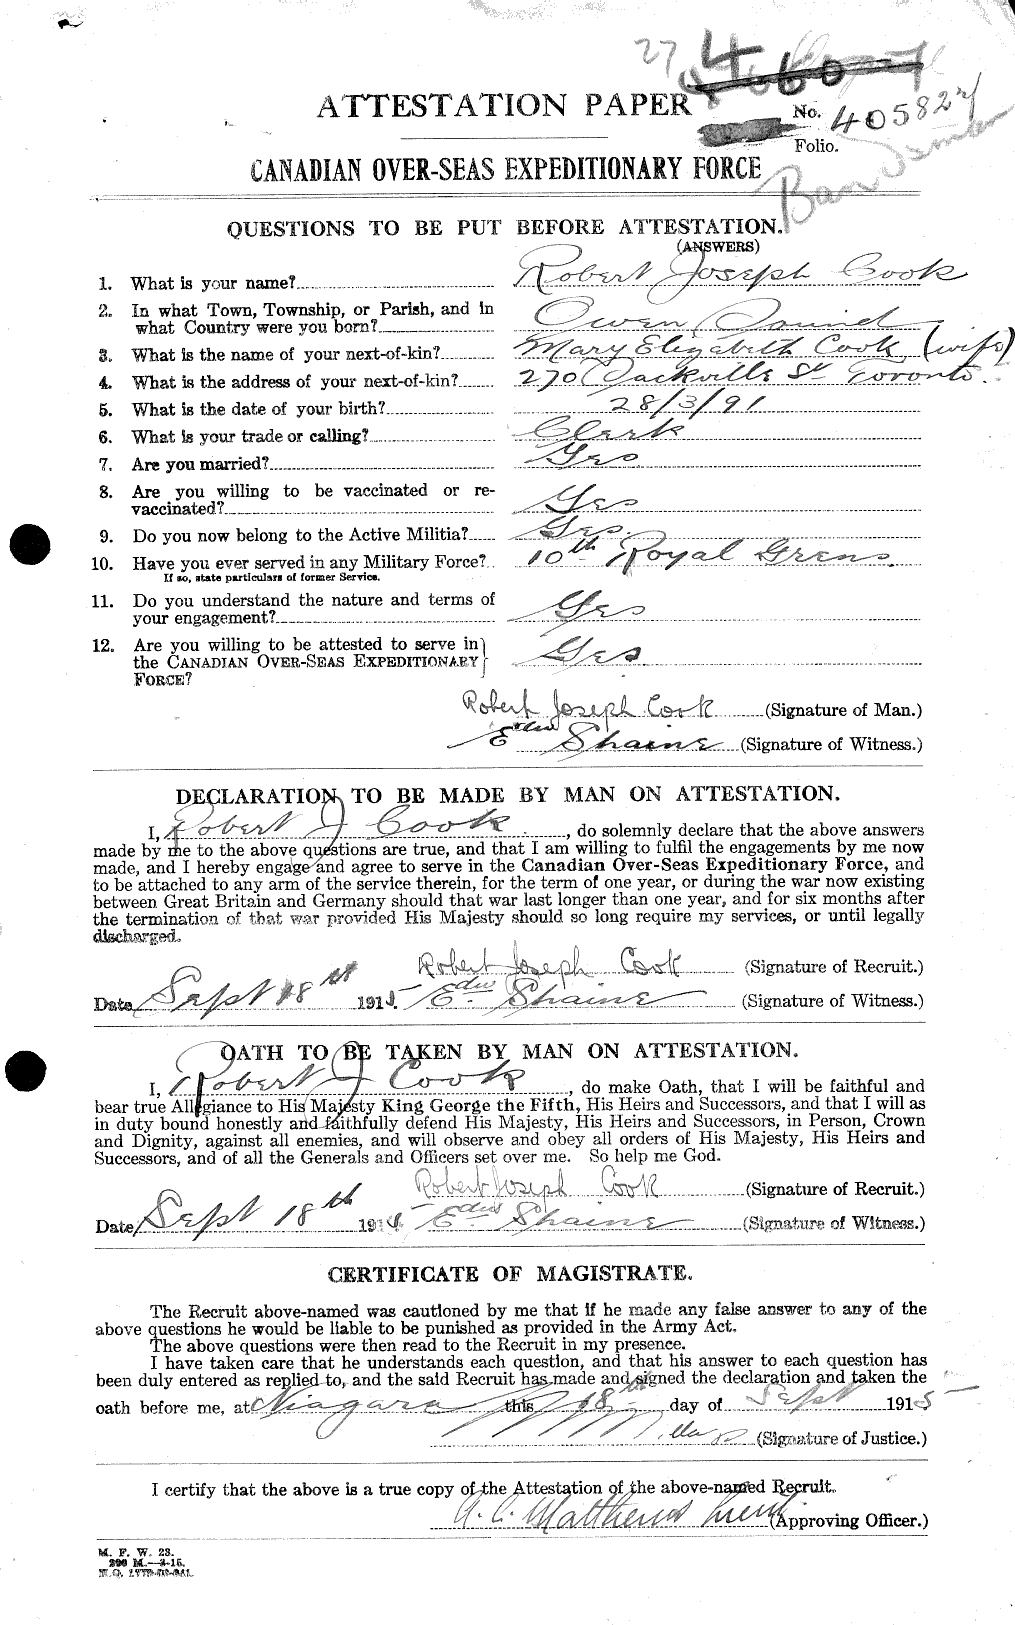 Personnel Records of the First World War - CEF 047274a